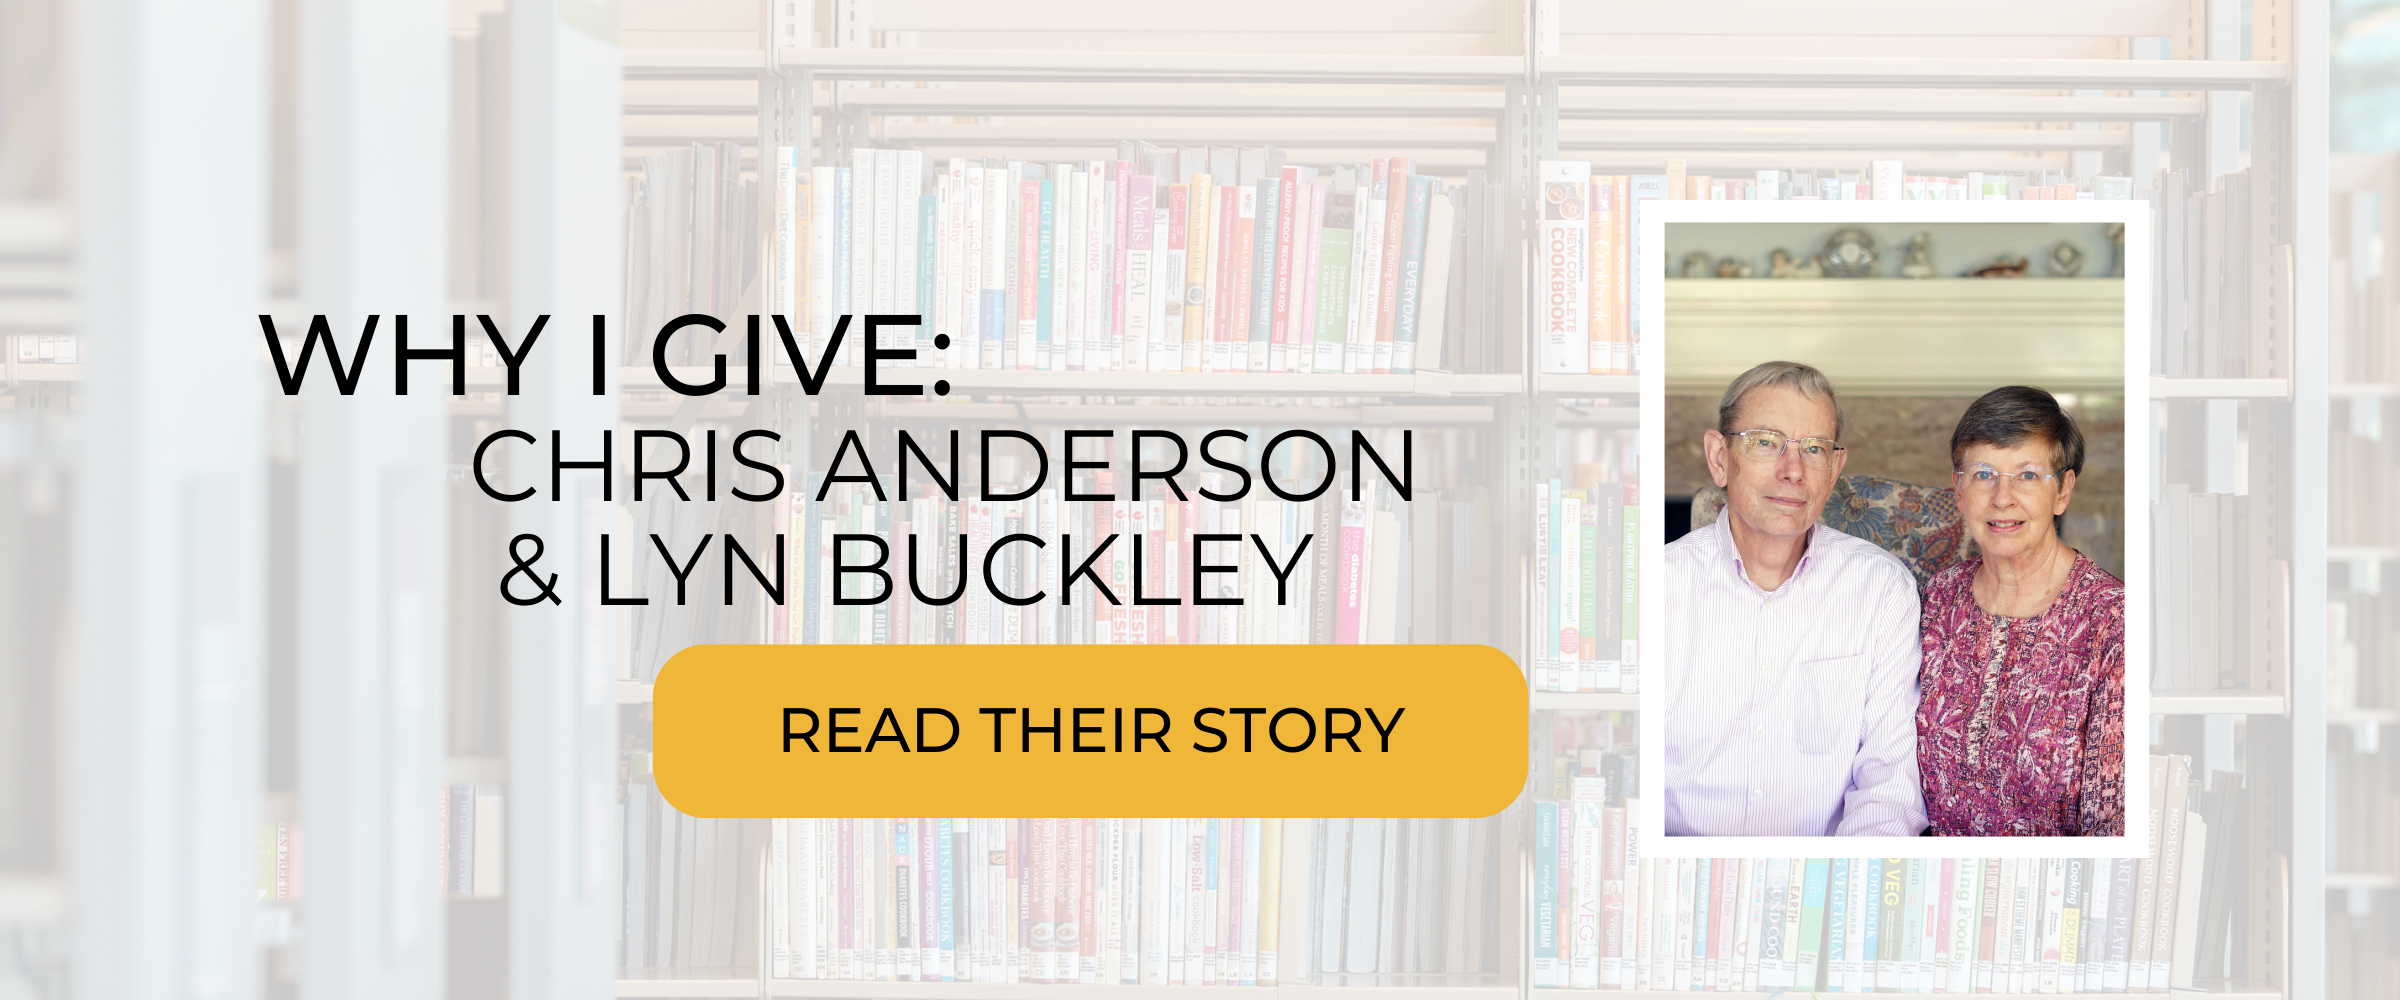 Why I Give: Chris Anderson and Lyn Buckley. Click to read their story!